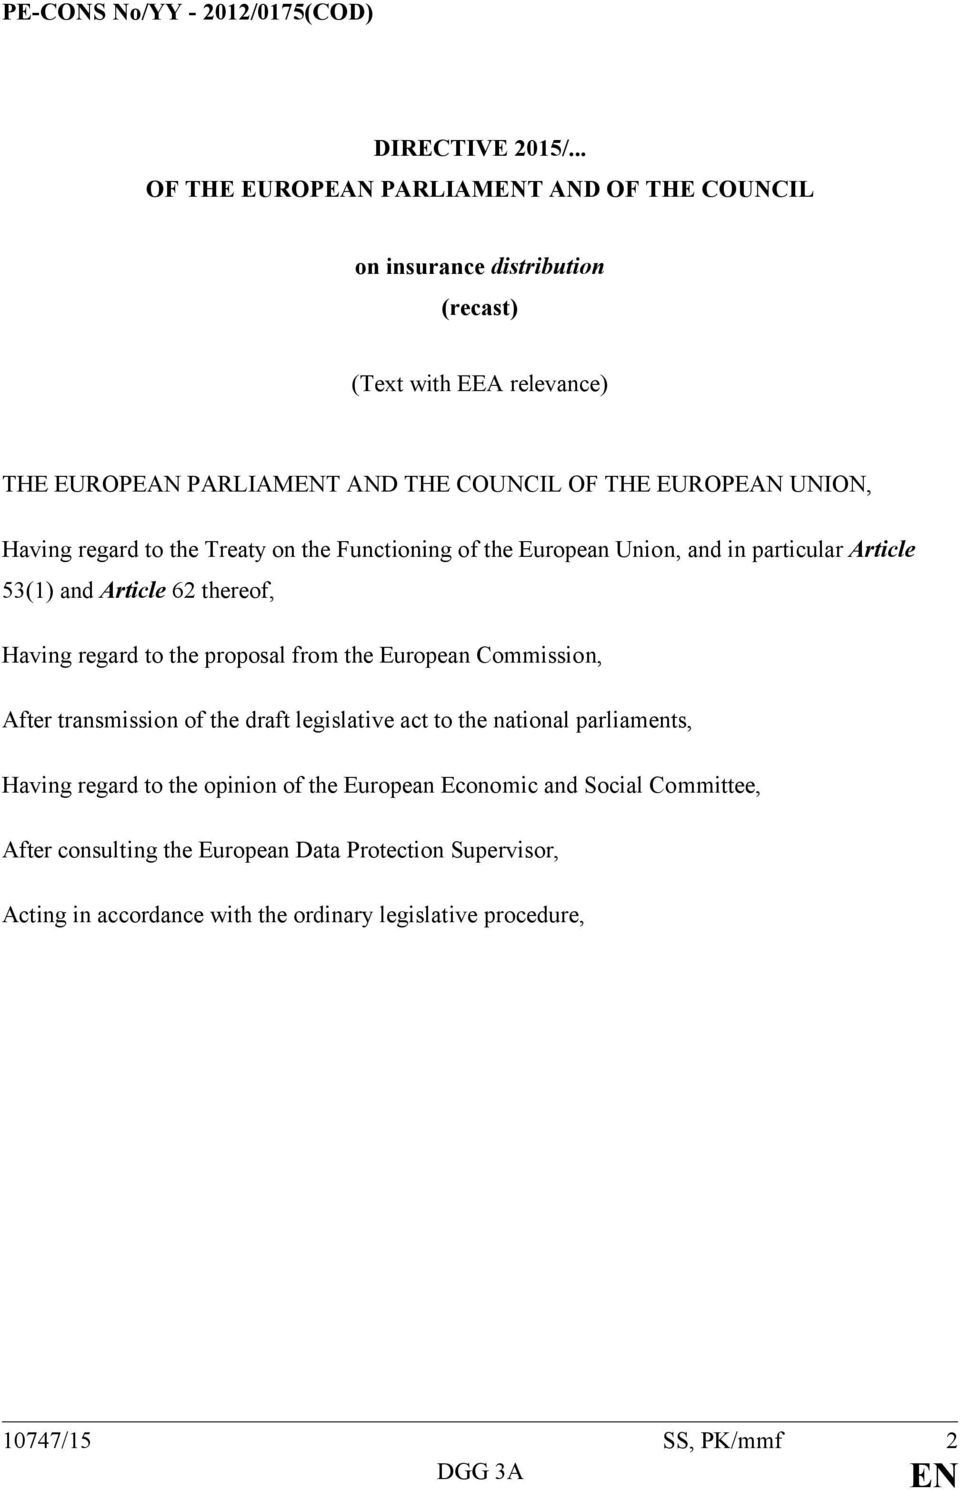 Having regard to the Treaty on the Functioning of the European Union, and in particular Article 53(1) and Article 62 thereof, Having regard to the proposal from the European